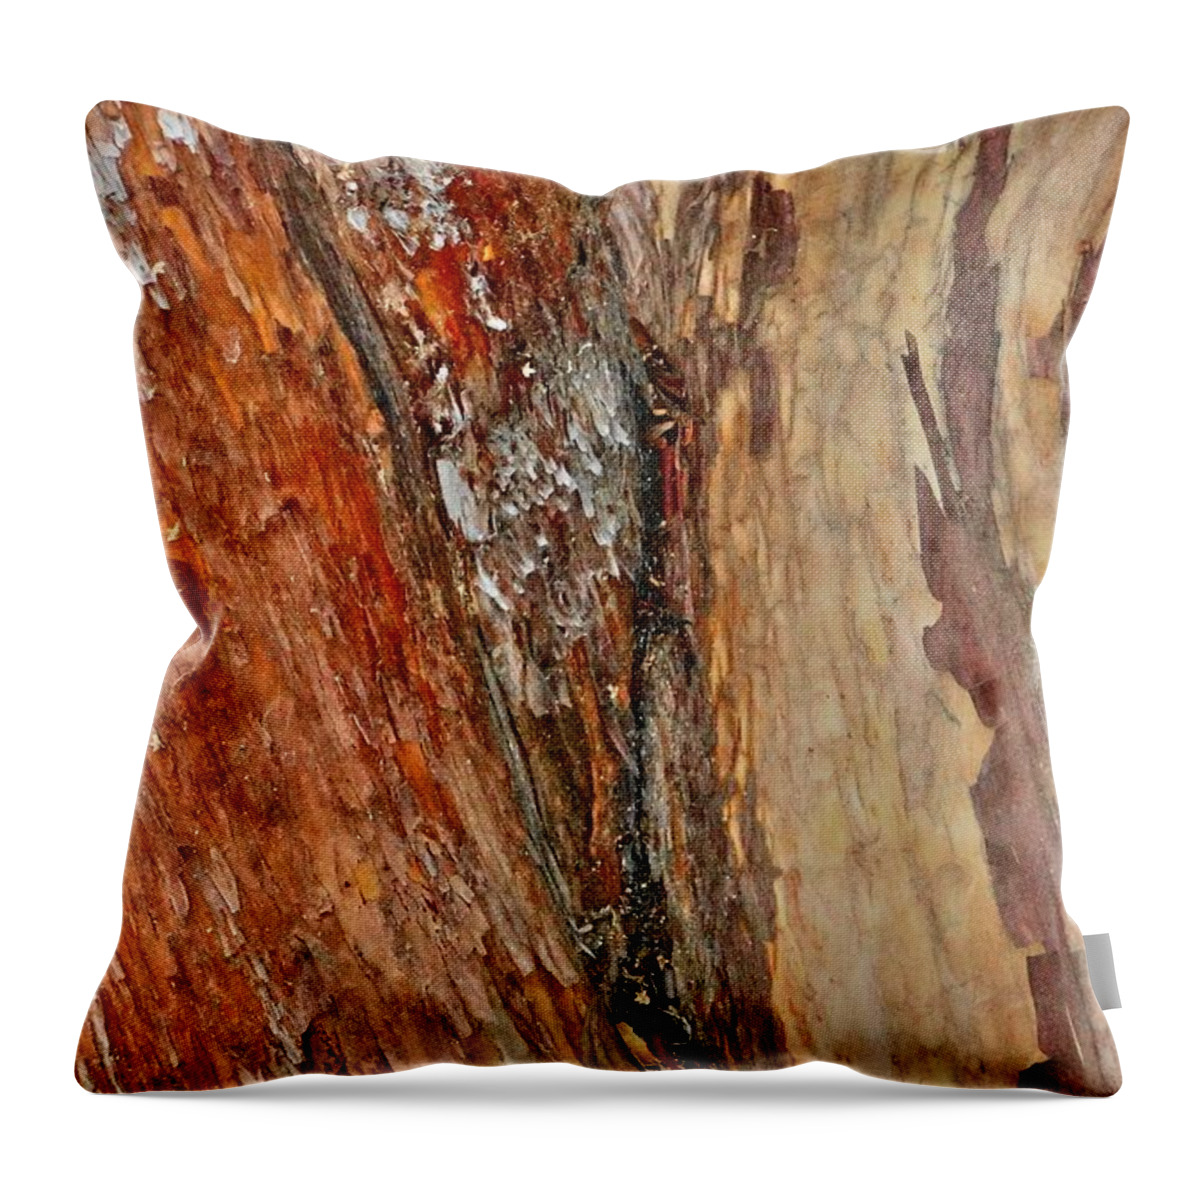 Bark Throw Pillow featuring the photograph Wealth by Nick David